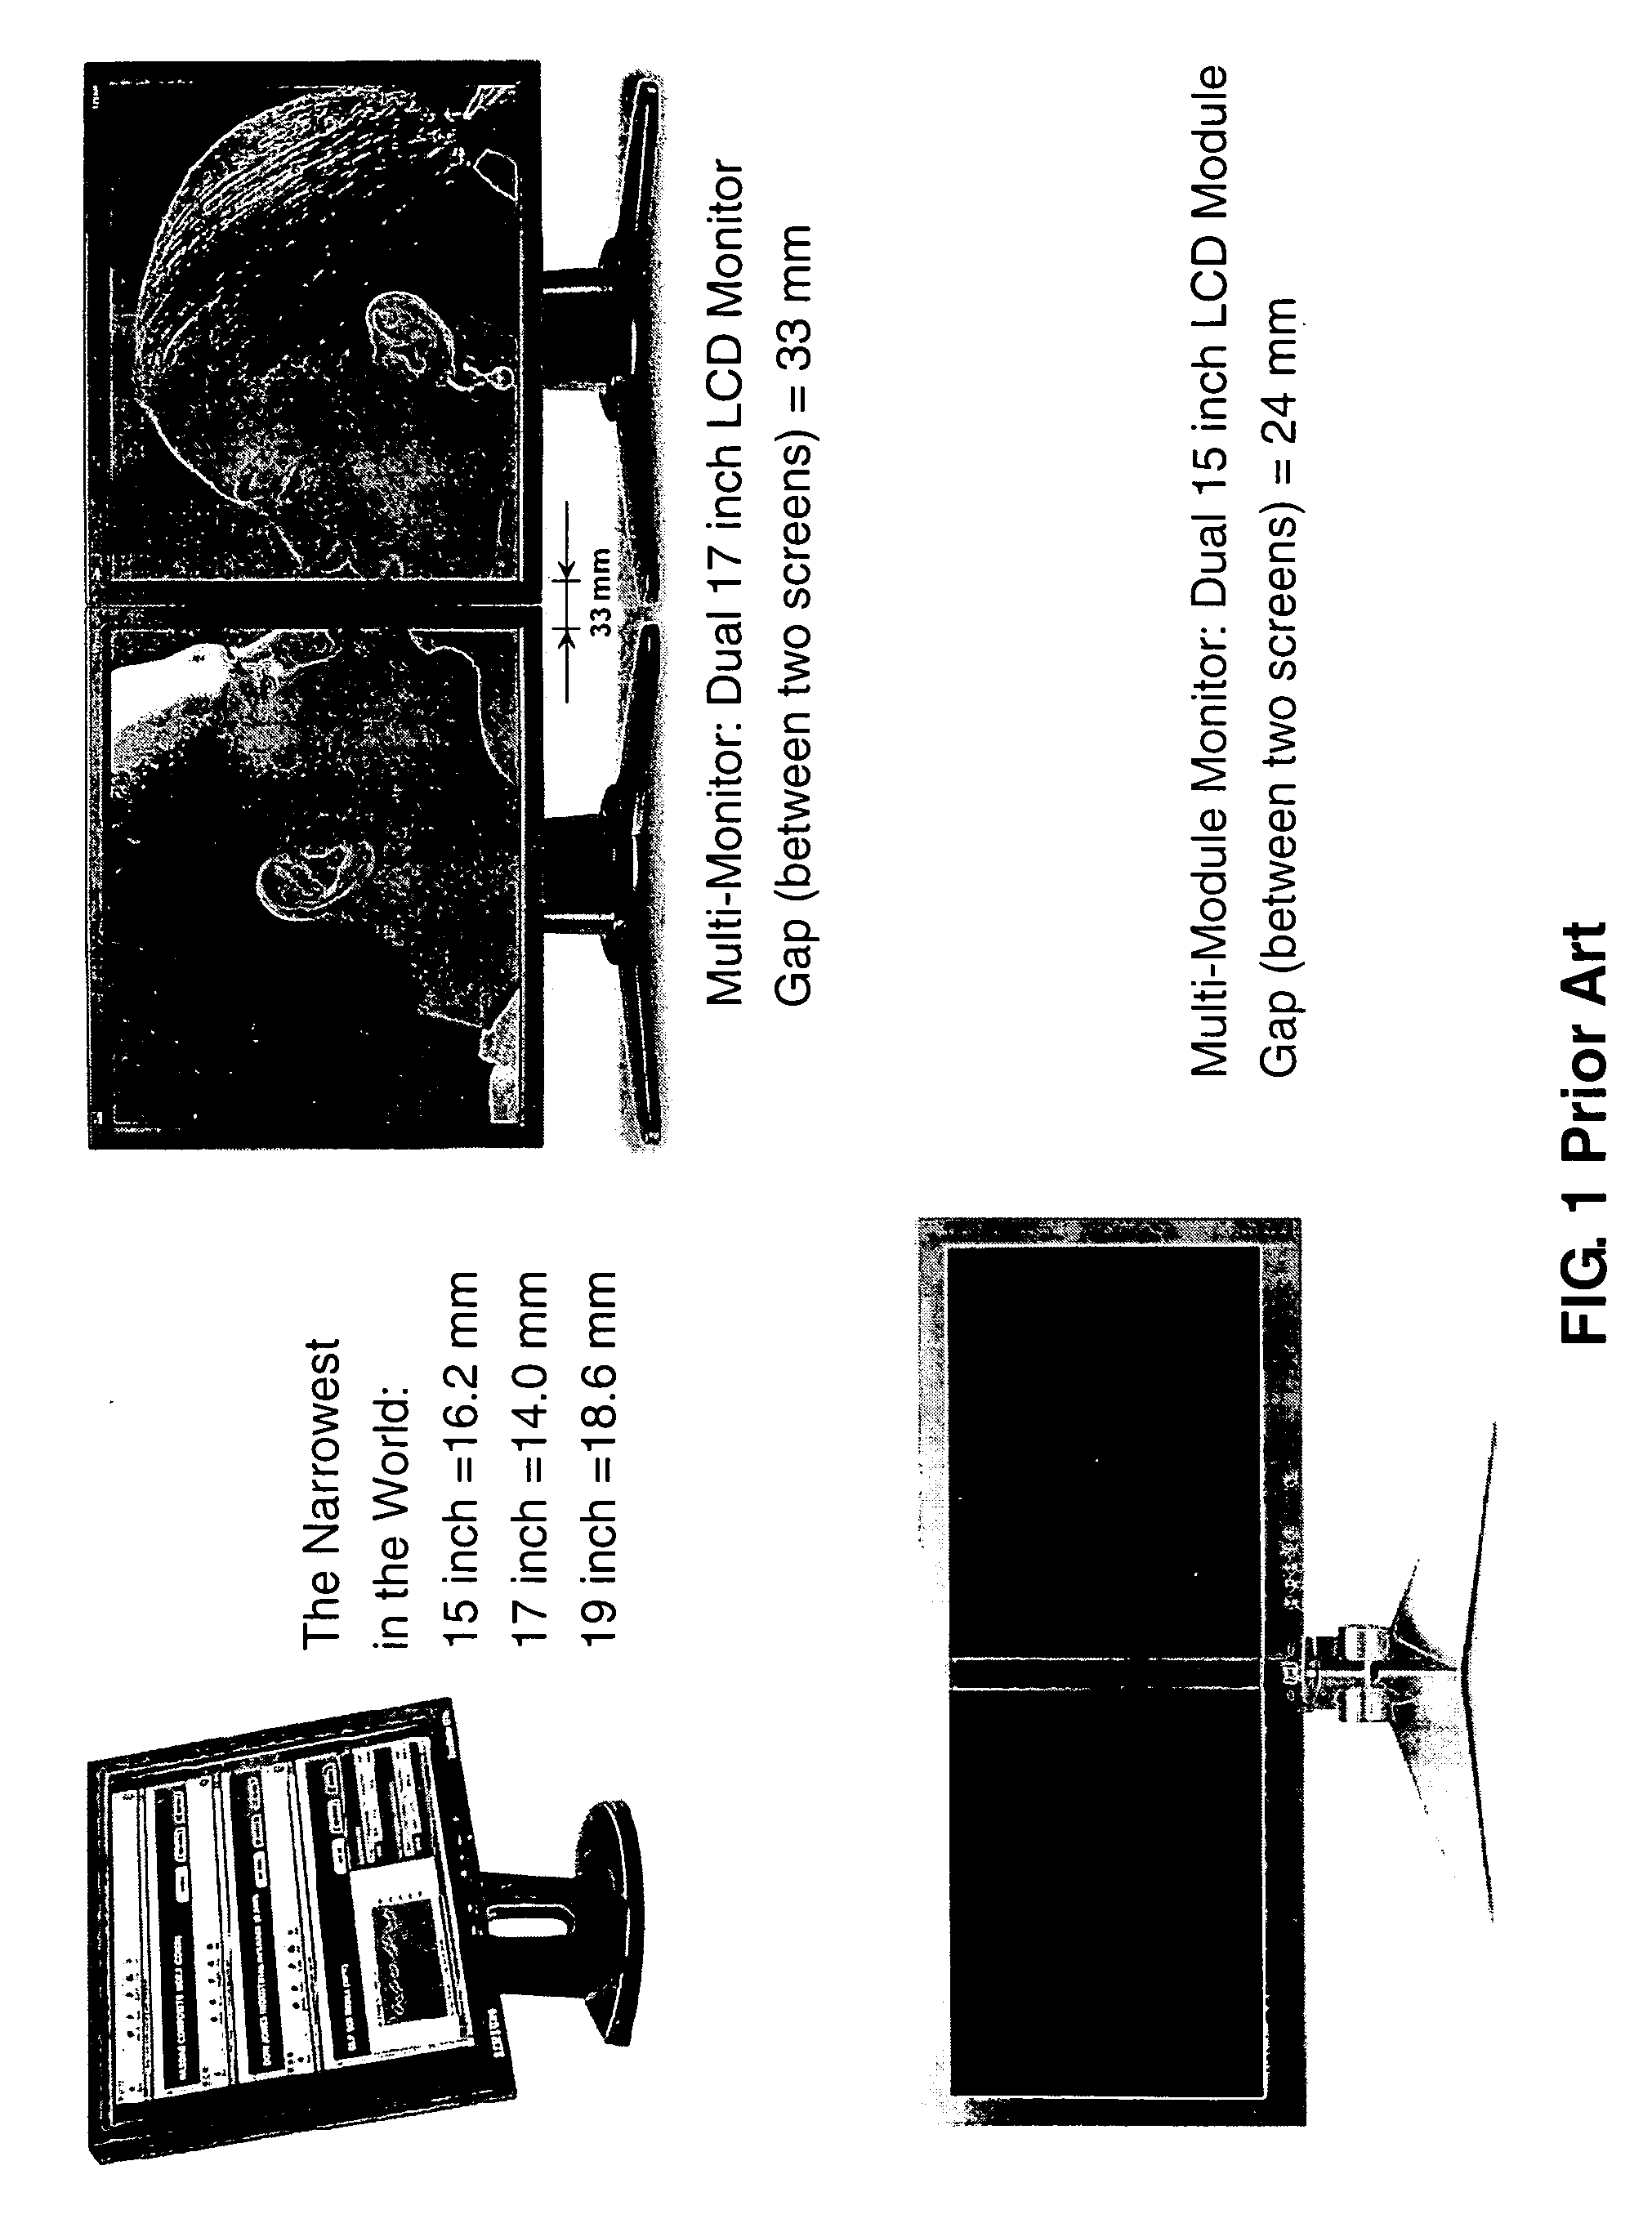 Multi-panel monitor displaying systems